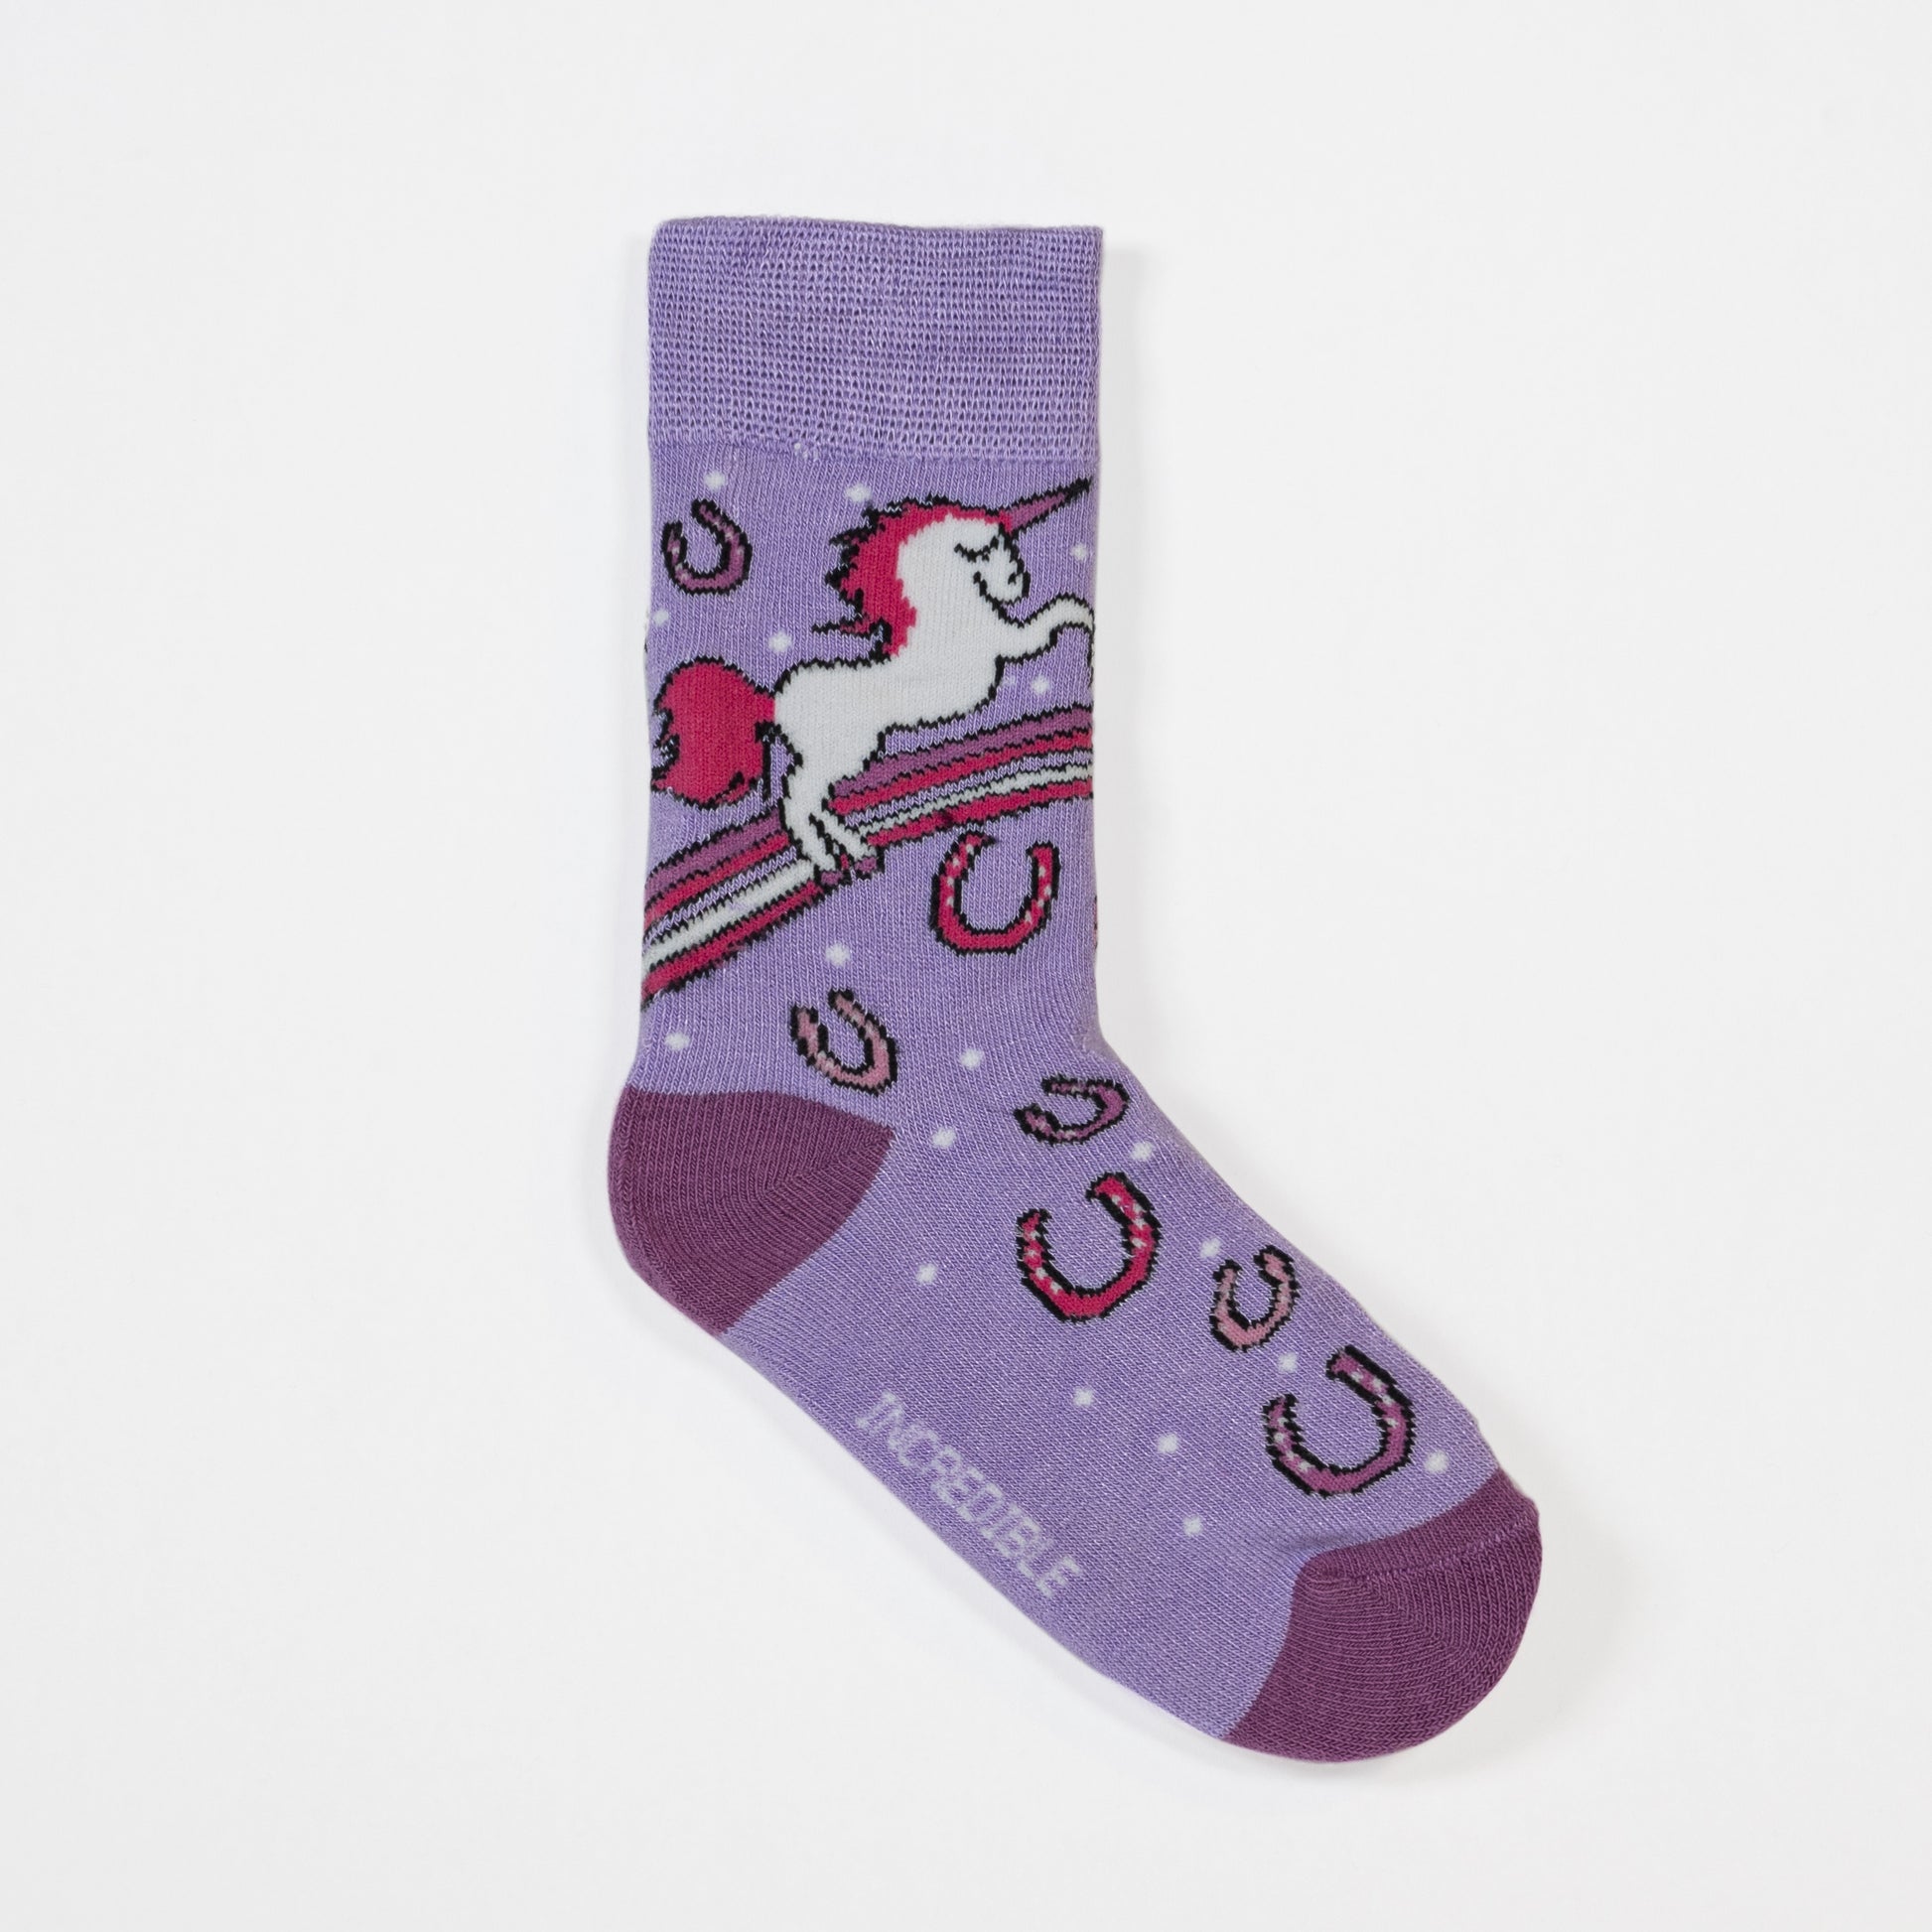 Kids socks with colorful unicorns. Made from sustainable bamboo.